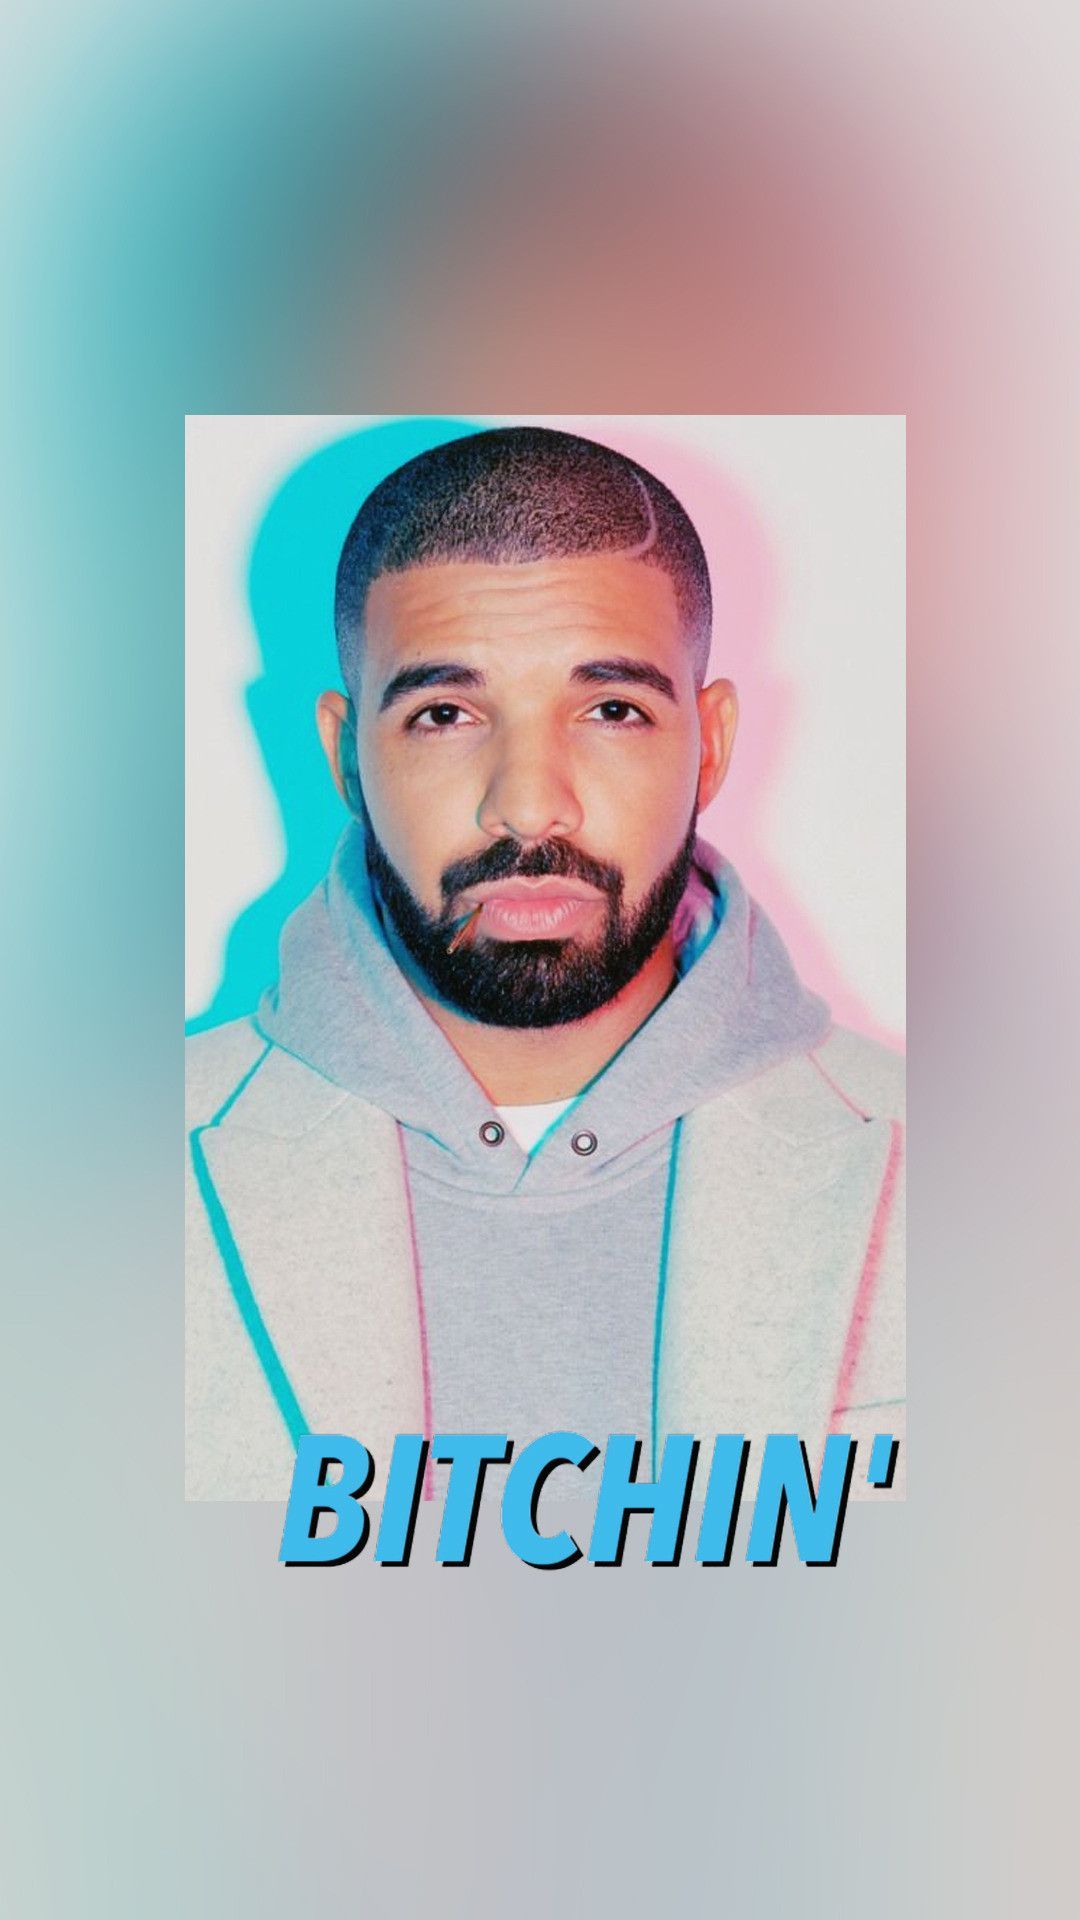 Drake Bitchin' iPhone Wallpaper with high-resolution 1080x1920 pixel. You can use this wallpaper for your iPhone 5, 6, 7, 8, X, XS, XR backgrounds, Mobile Screensaver, or iPad Lock Screen - Drake